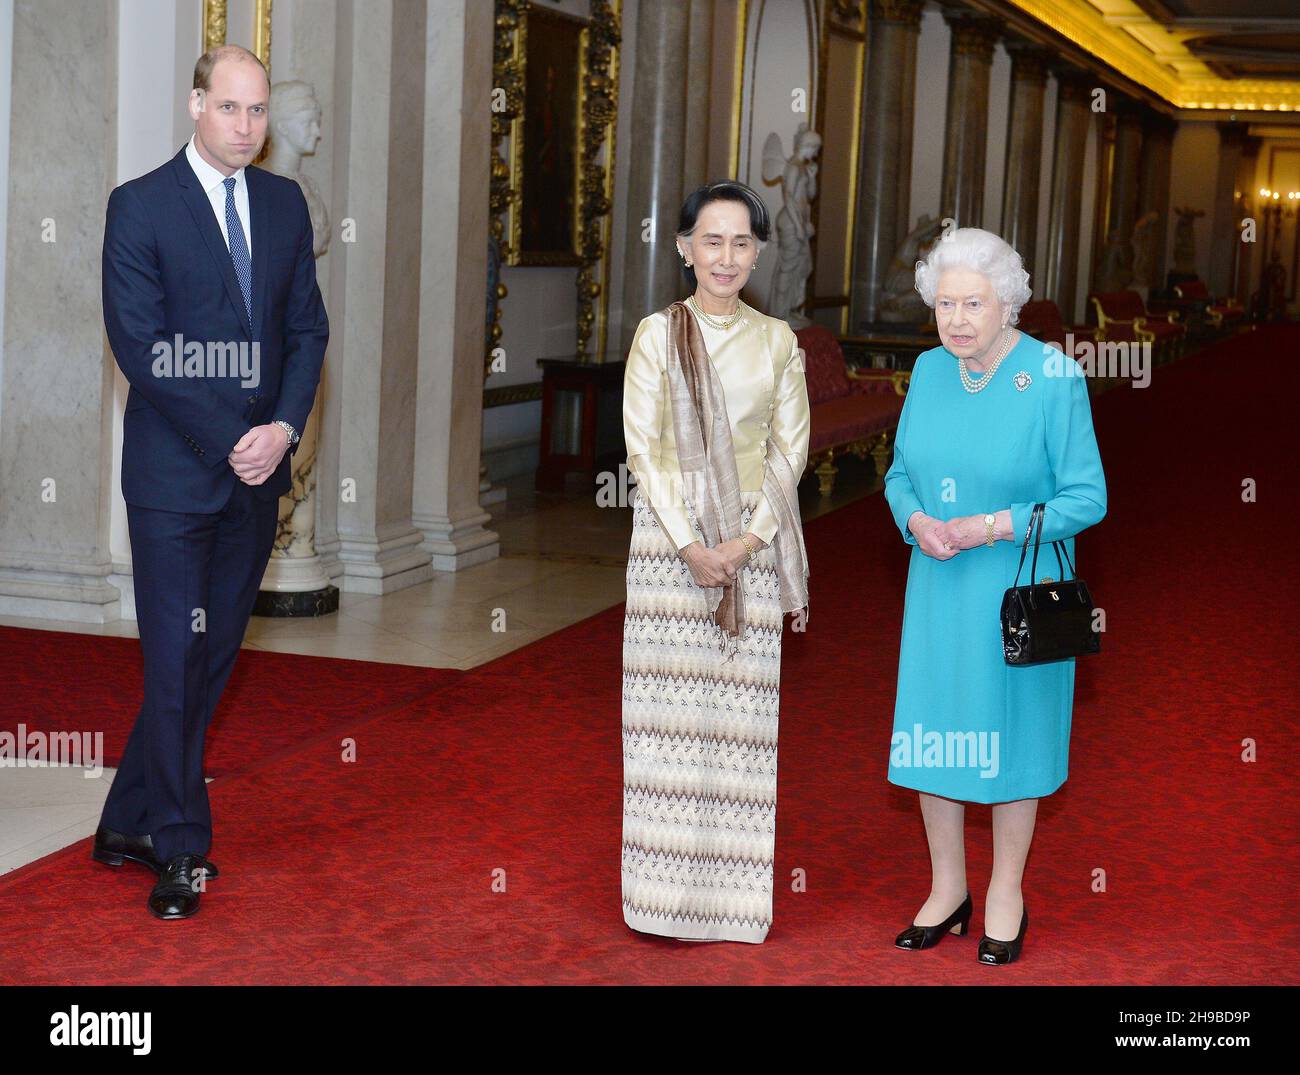 File photo dated 5/5/2017 of Queen Elizabeth II and the Duke of Cambridge greeting Burma's then de facto leader Aung San Suu Kyi ahead of a private lunch at Buckingham Palace in London. A court in Myanmar has sentenced the country's ousted leader, Aung San Suu Kyi, to four years in prison after finding her guilty of incitement and violating coronavirus restrictions, a legal official said. Issue date: Monday December 6, 2021. Stock Photo